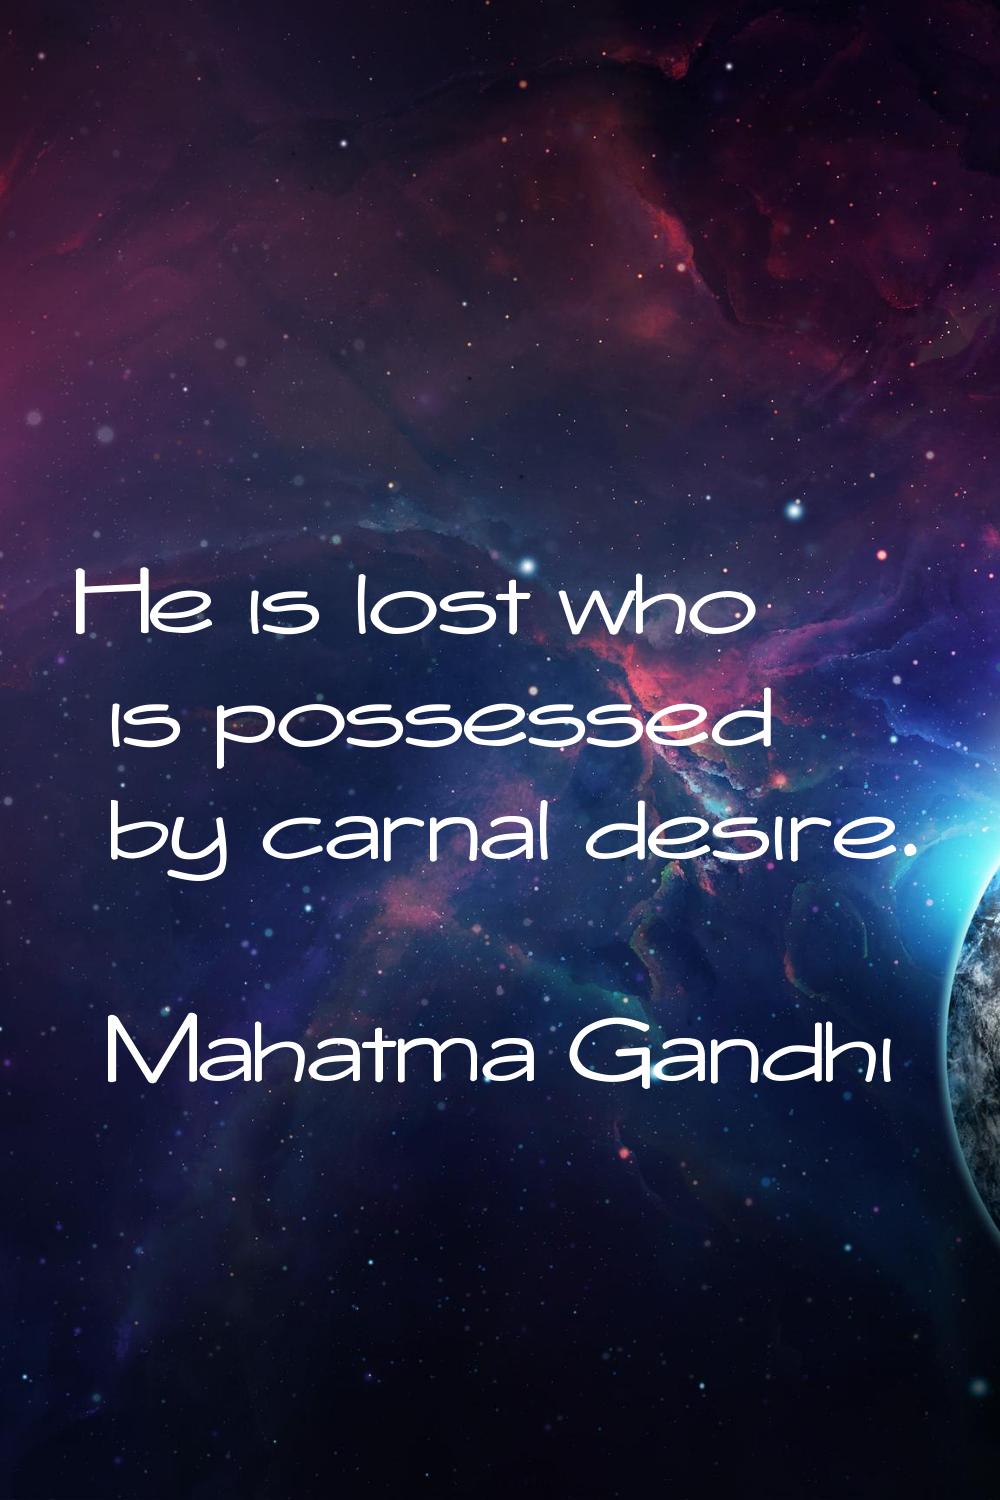 He is lost who is possessed by carnal desire.